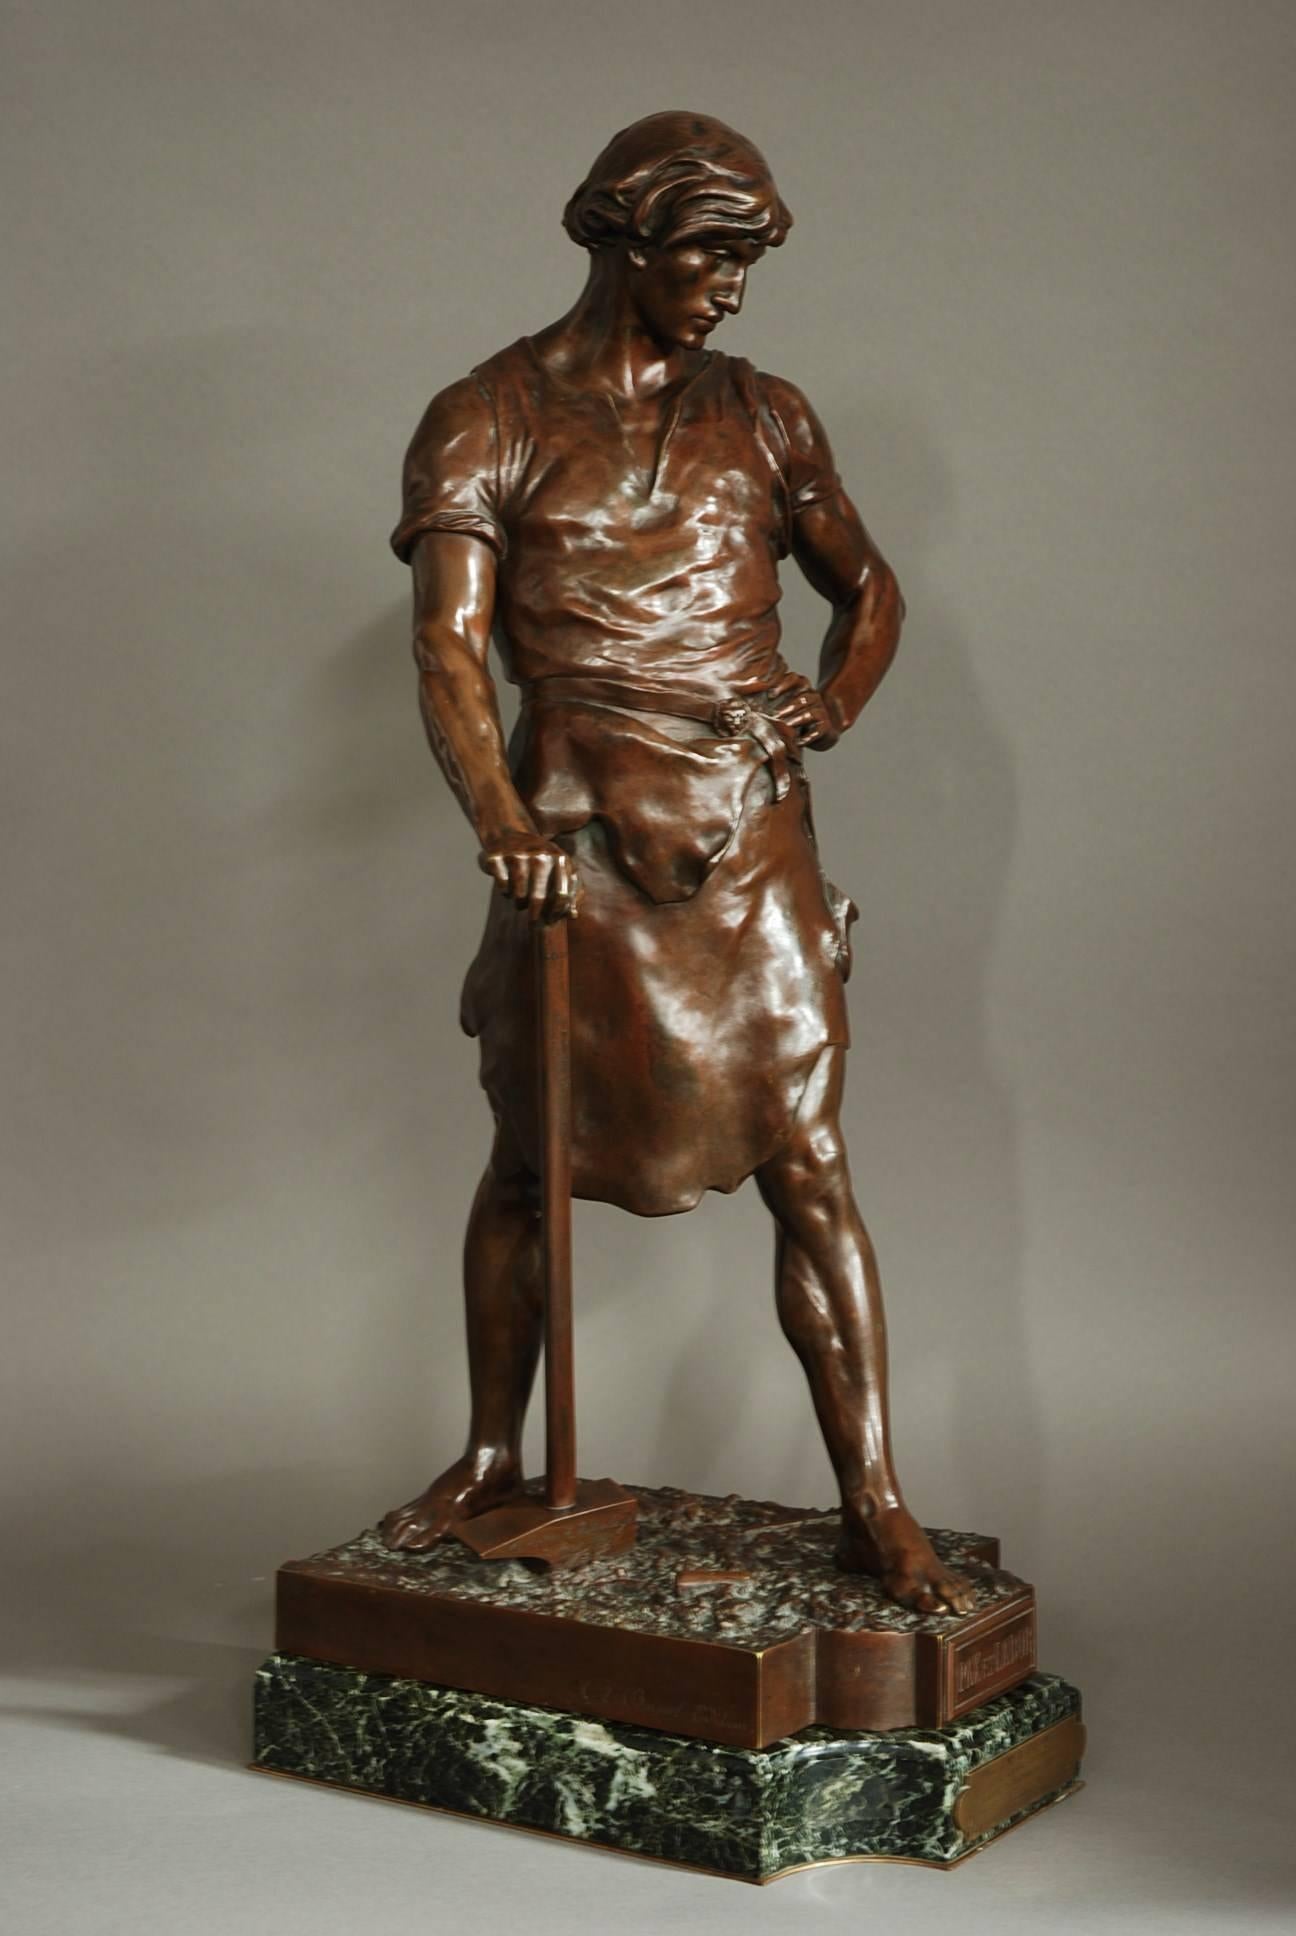 A large superb quality late 19th century French bronze by Emile Louis Picault (1833-1915) 'Pax et Labor' which translates to 'Peace & Labour', marked 'Picault' of very fine patina.

This bronze consists of a muscular blacksmith or riveter who is